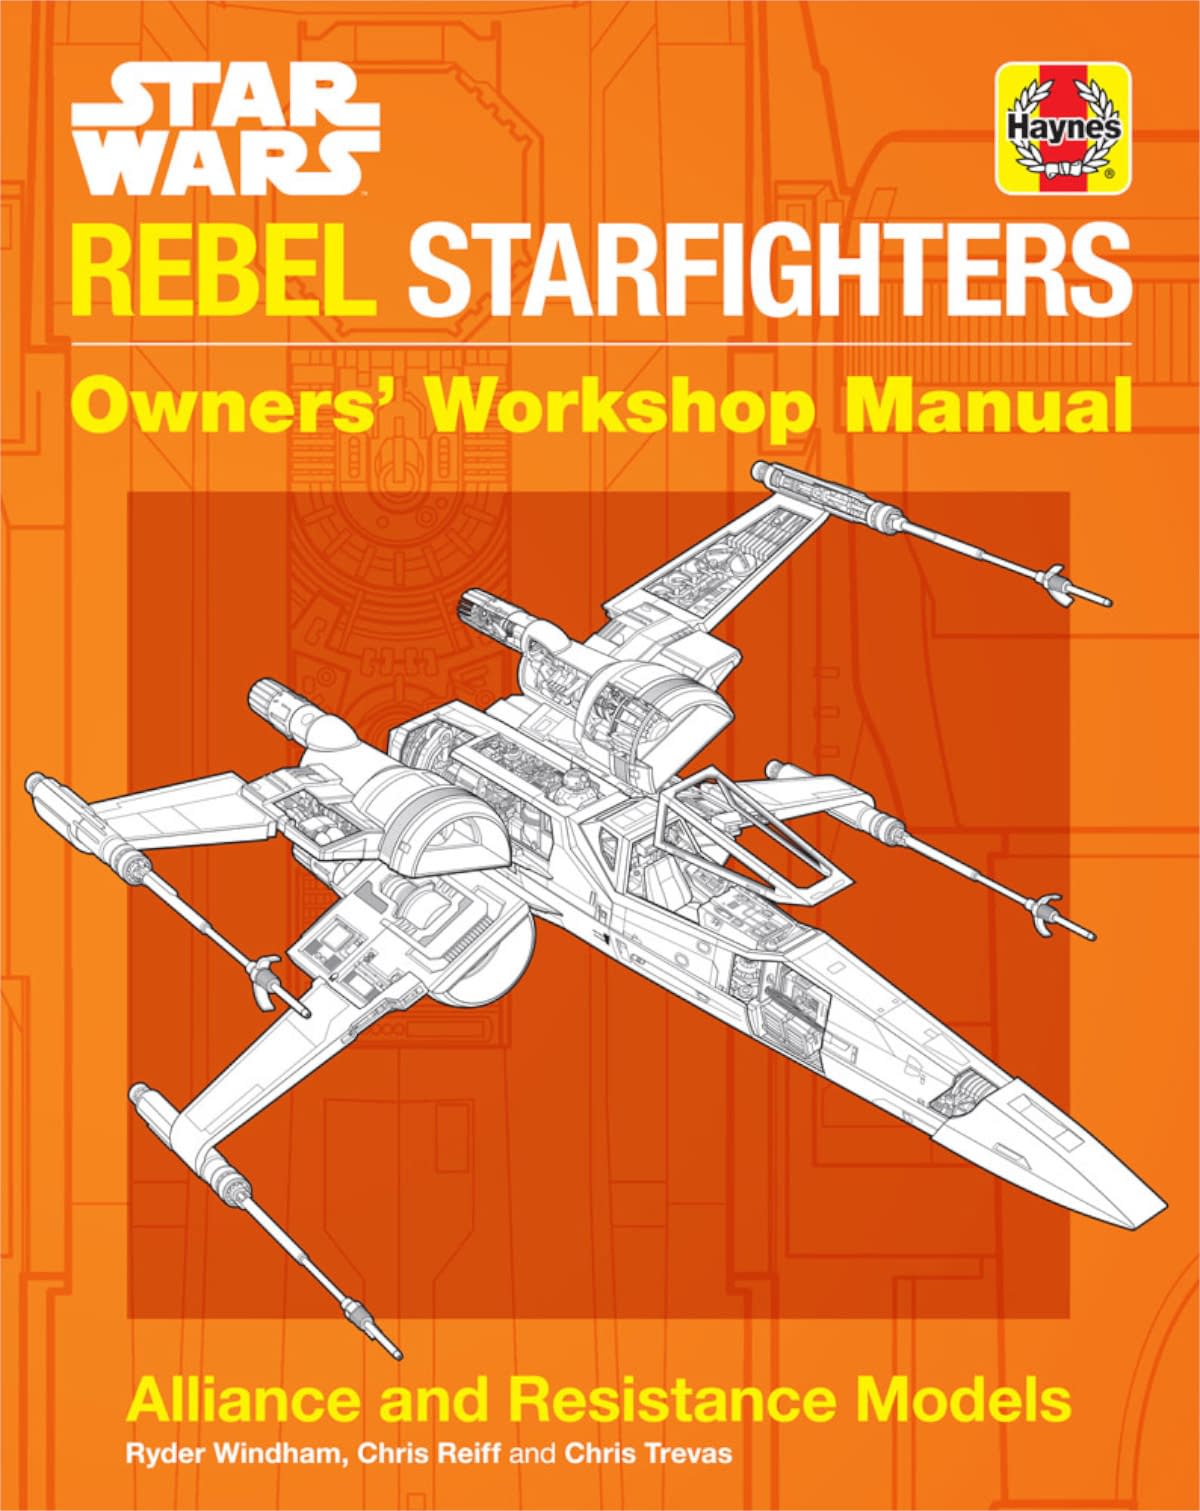 New "Star Wars" Book Looks Beneath the Hood of Classic Ships